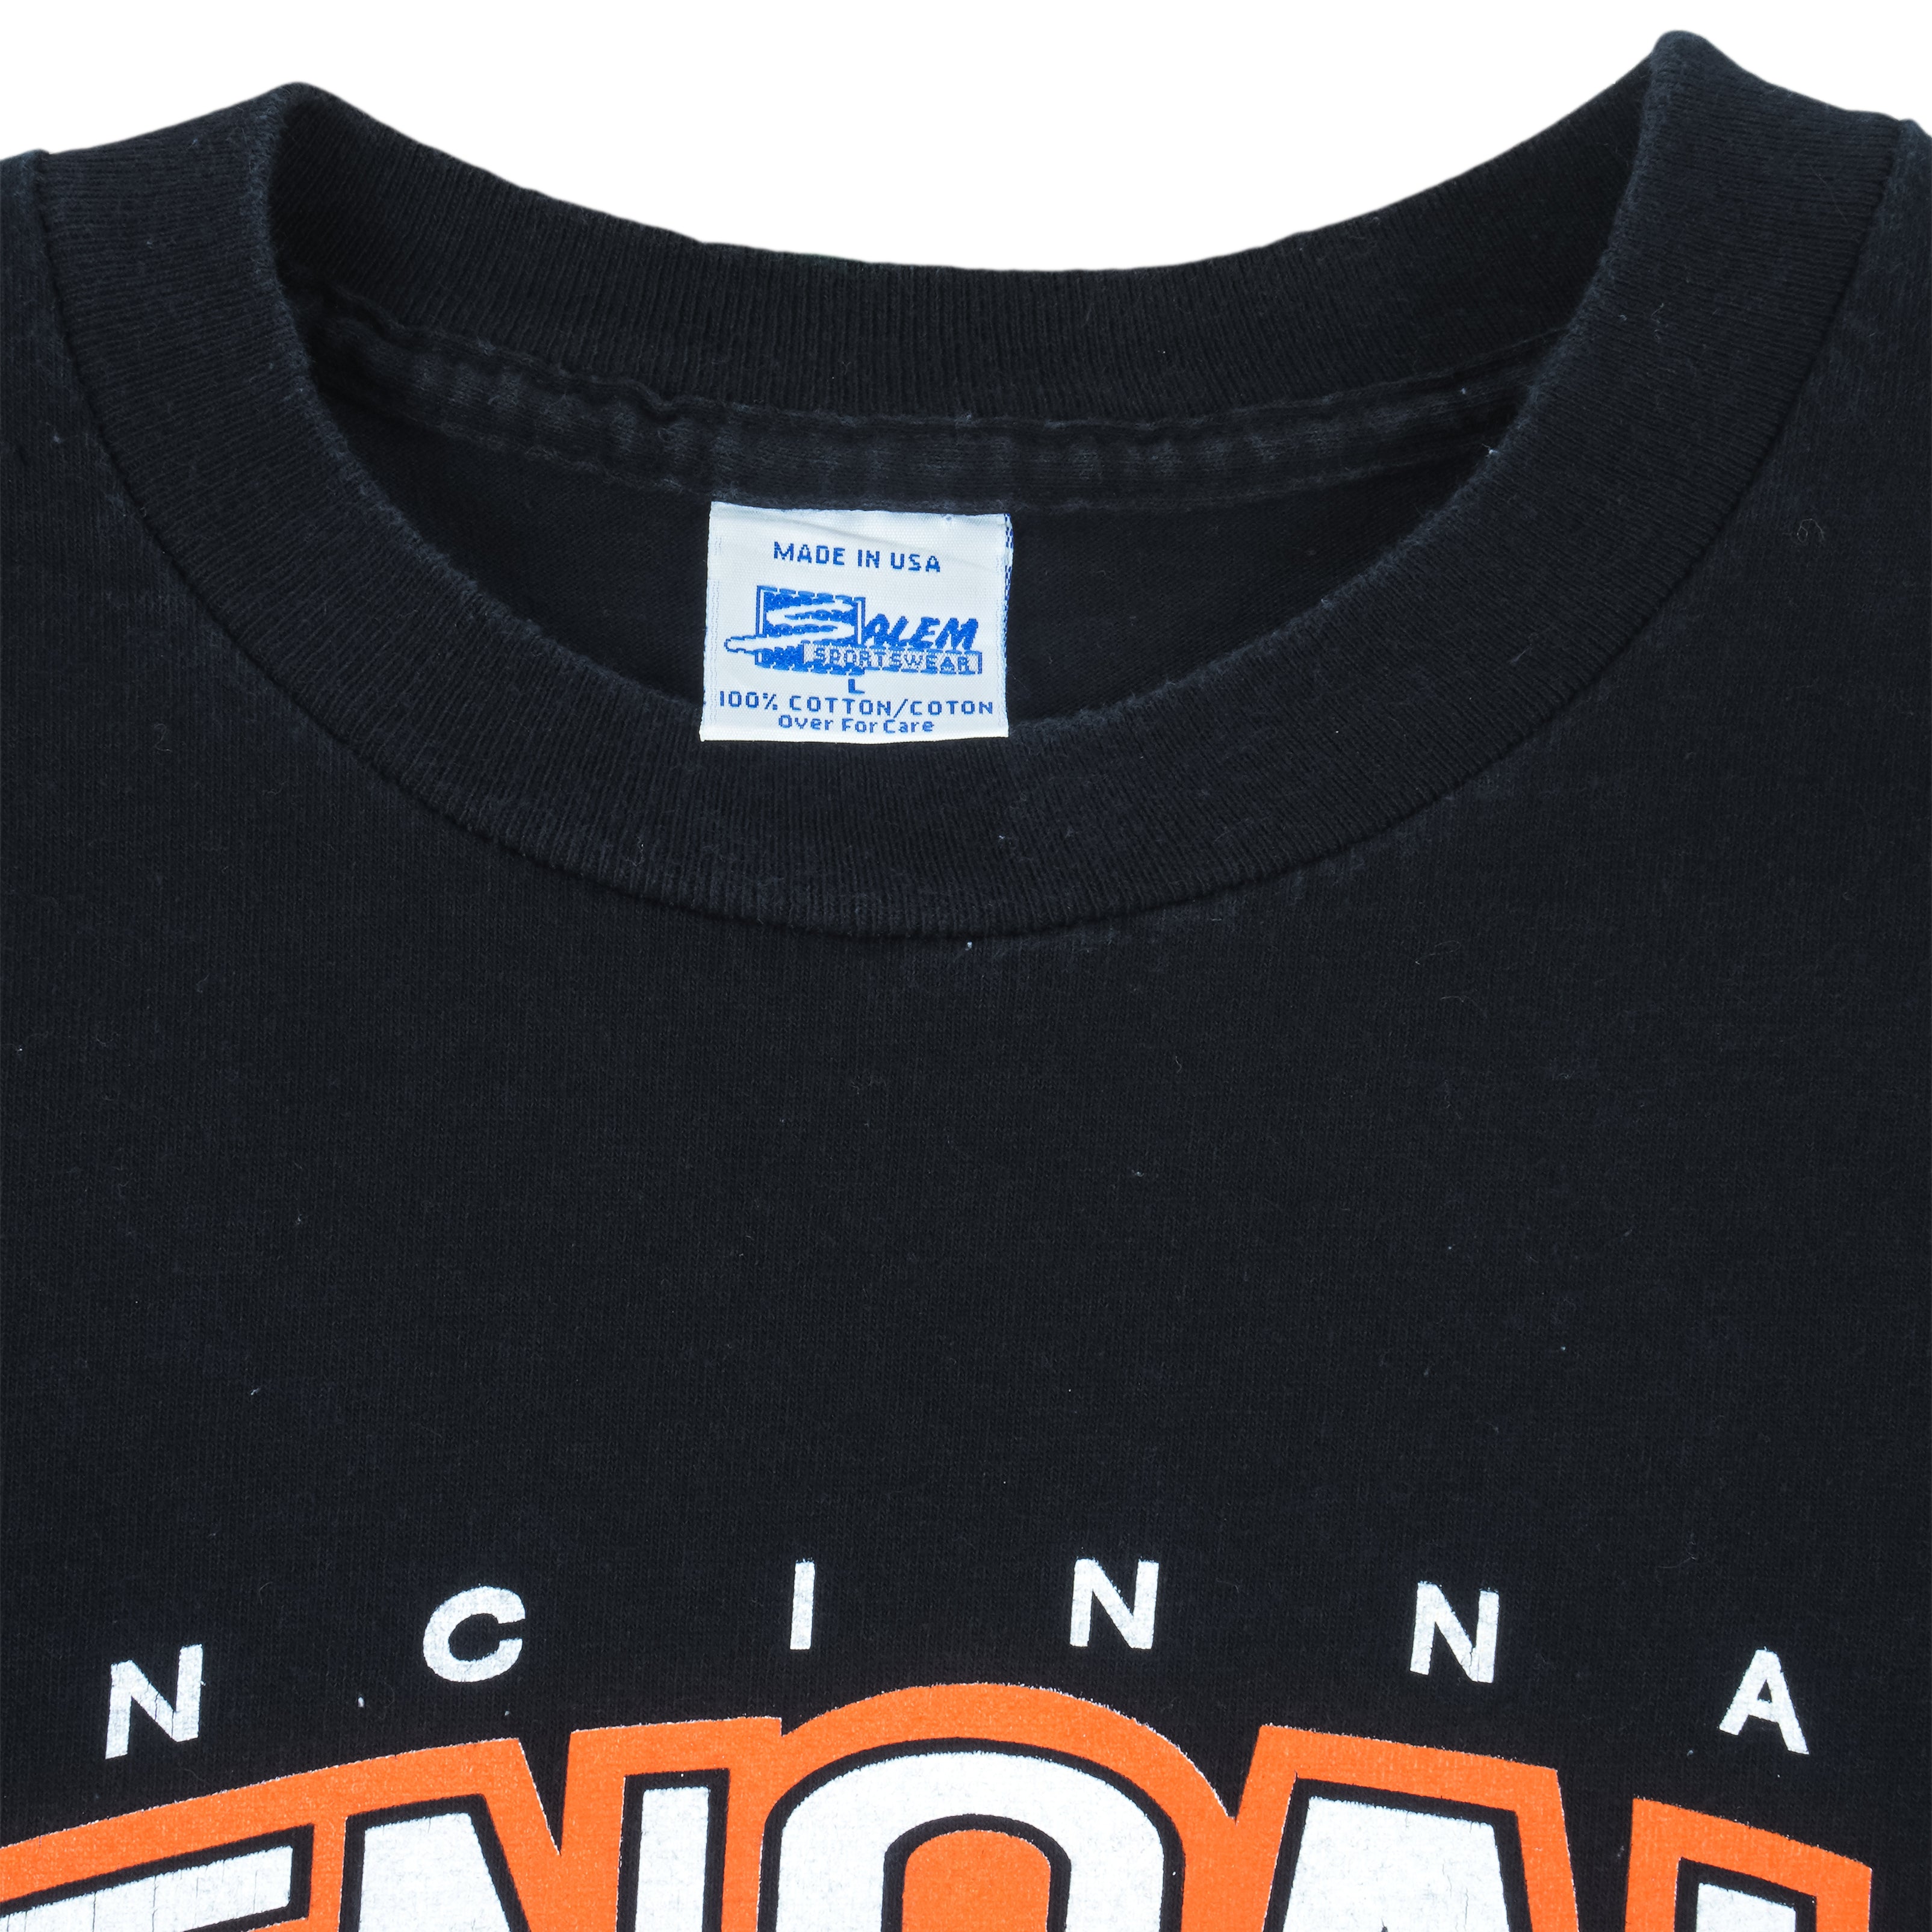 Cincinnati Bengals are AFC Champions, where to get hats, T-shirts,  championship gear 